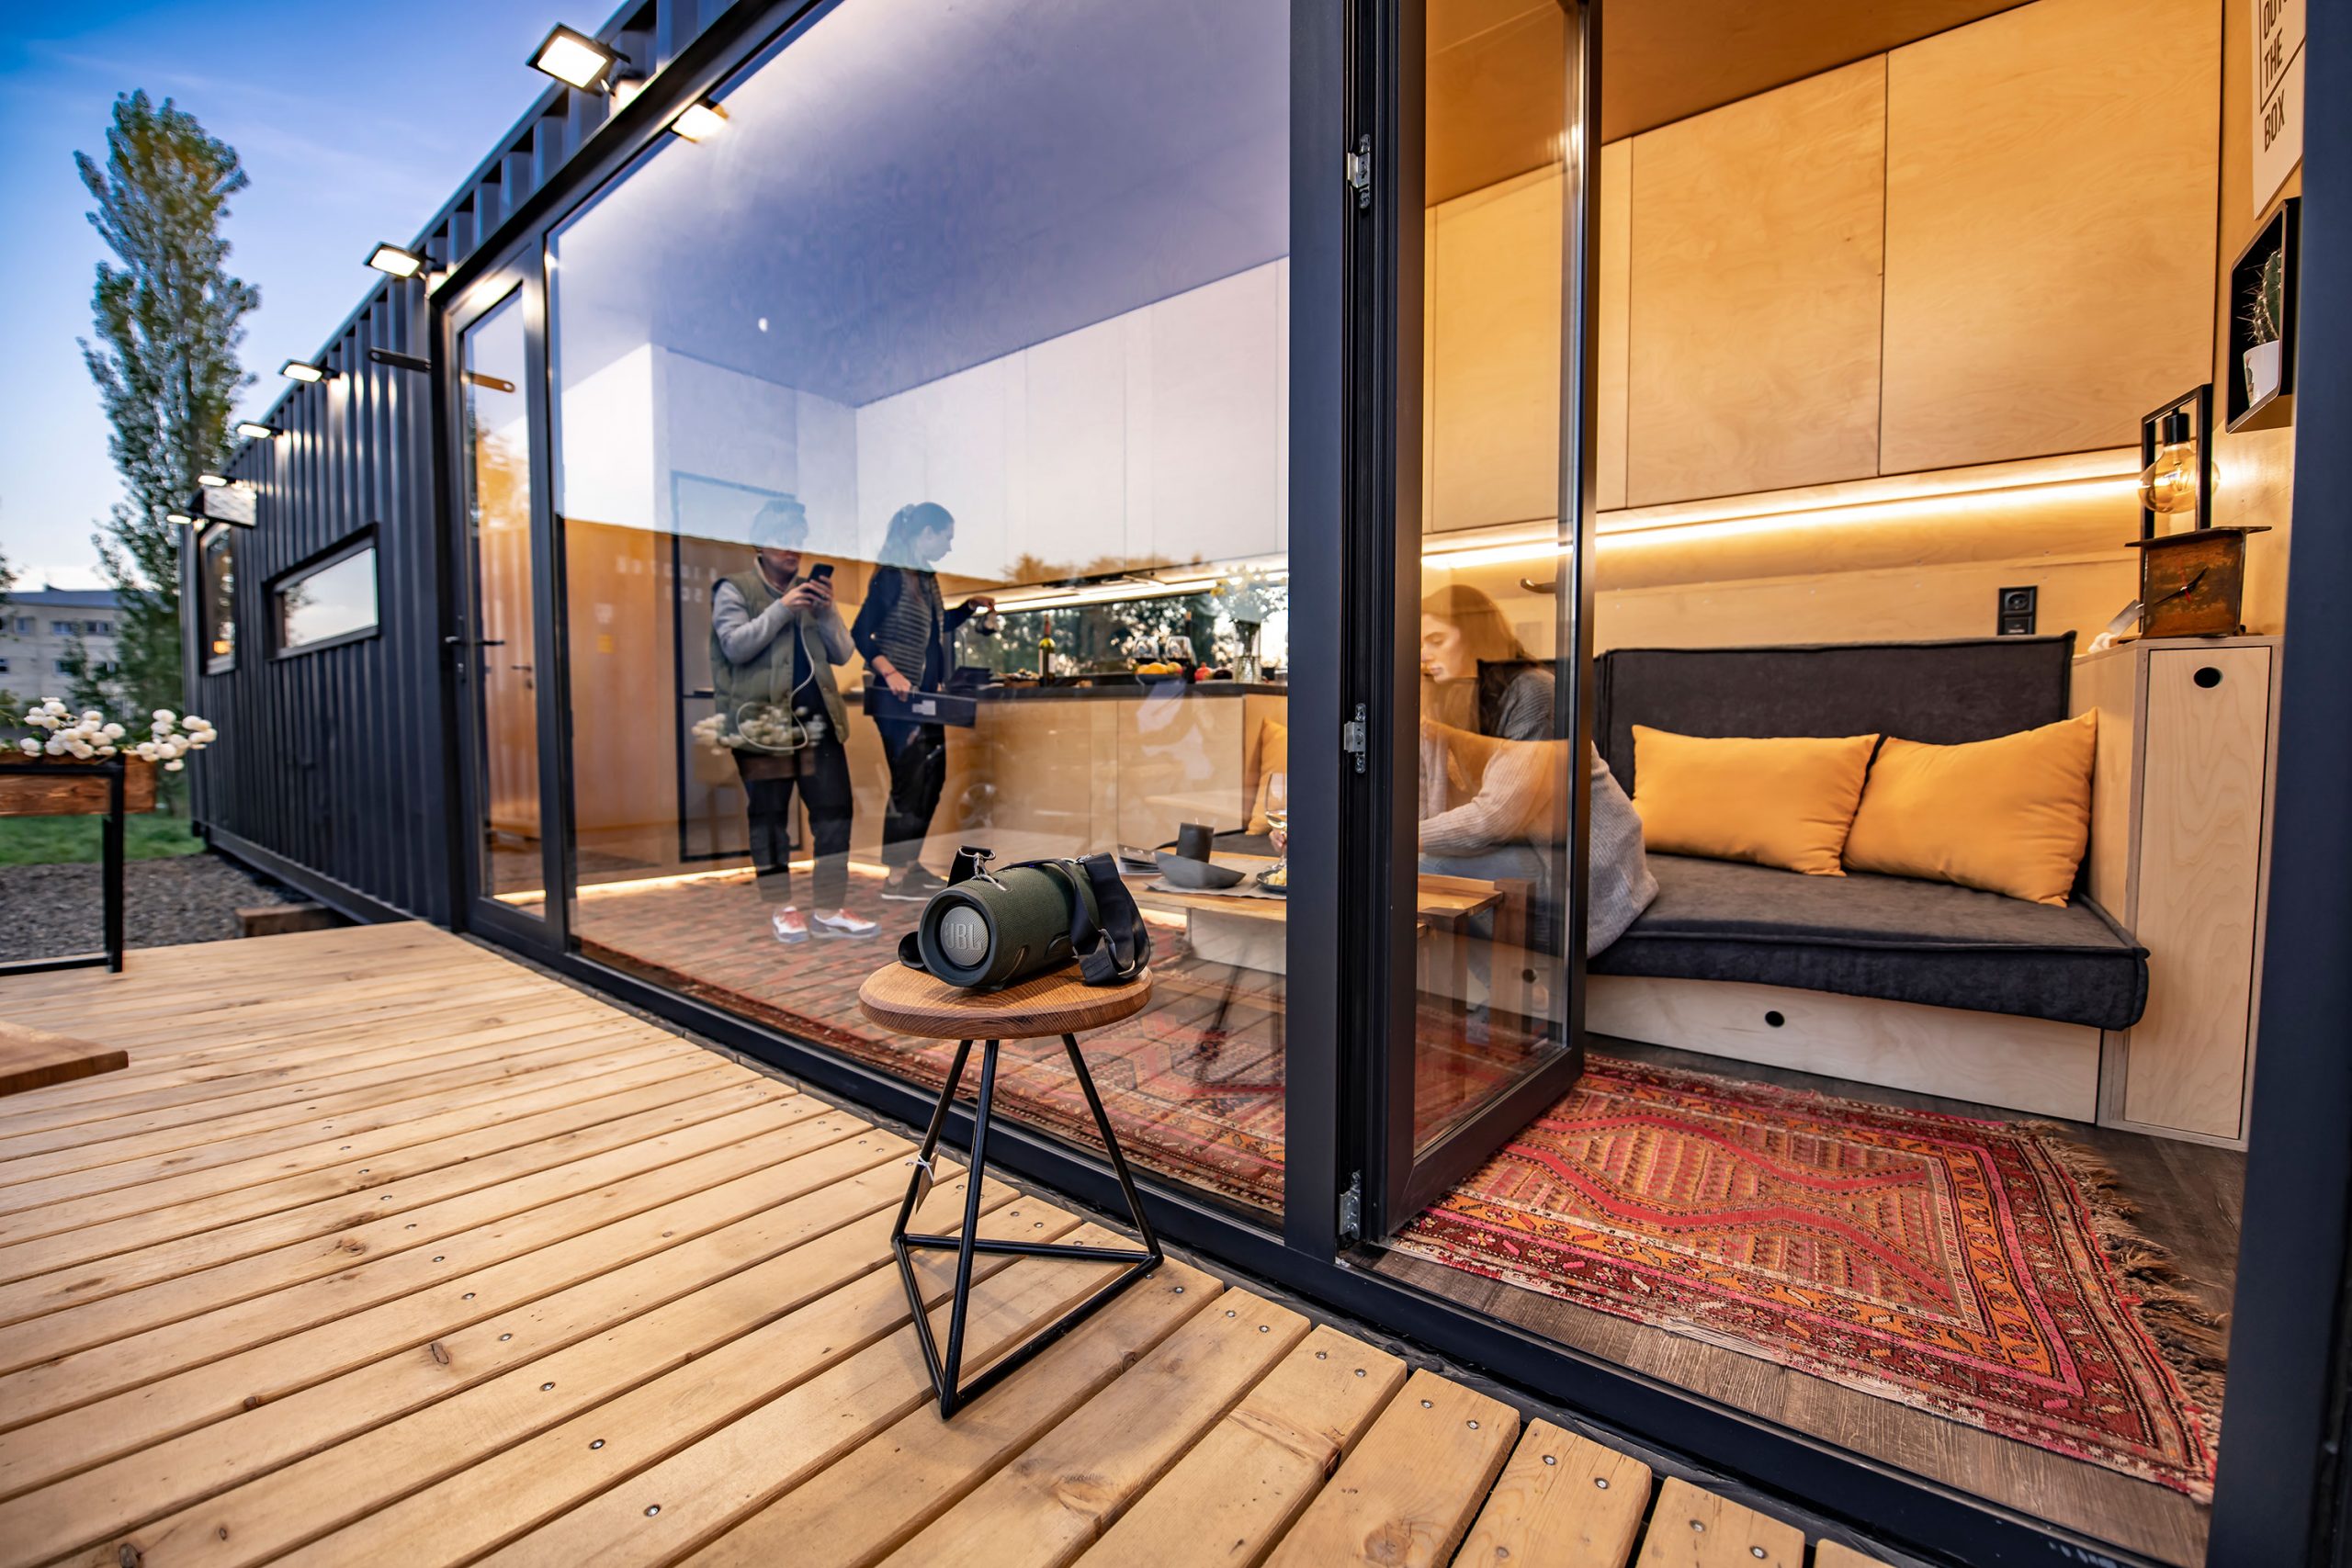 Why container homes?